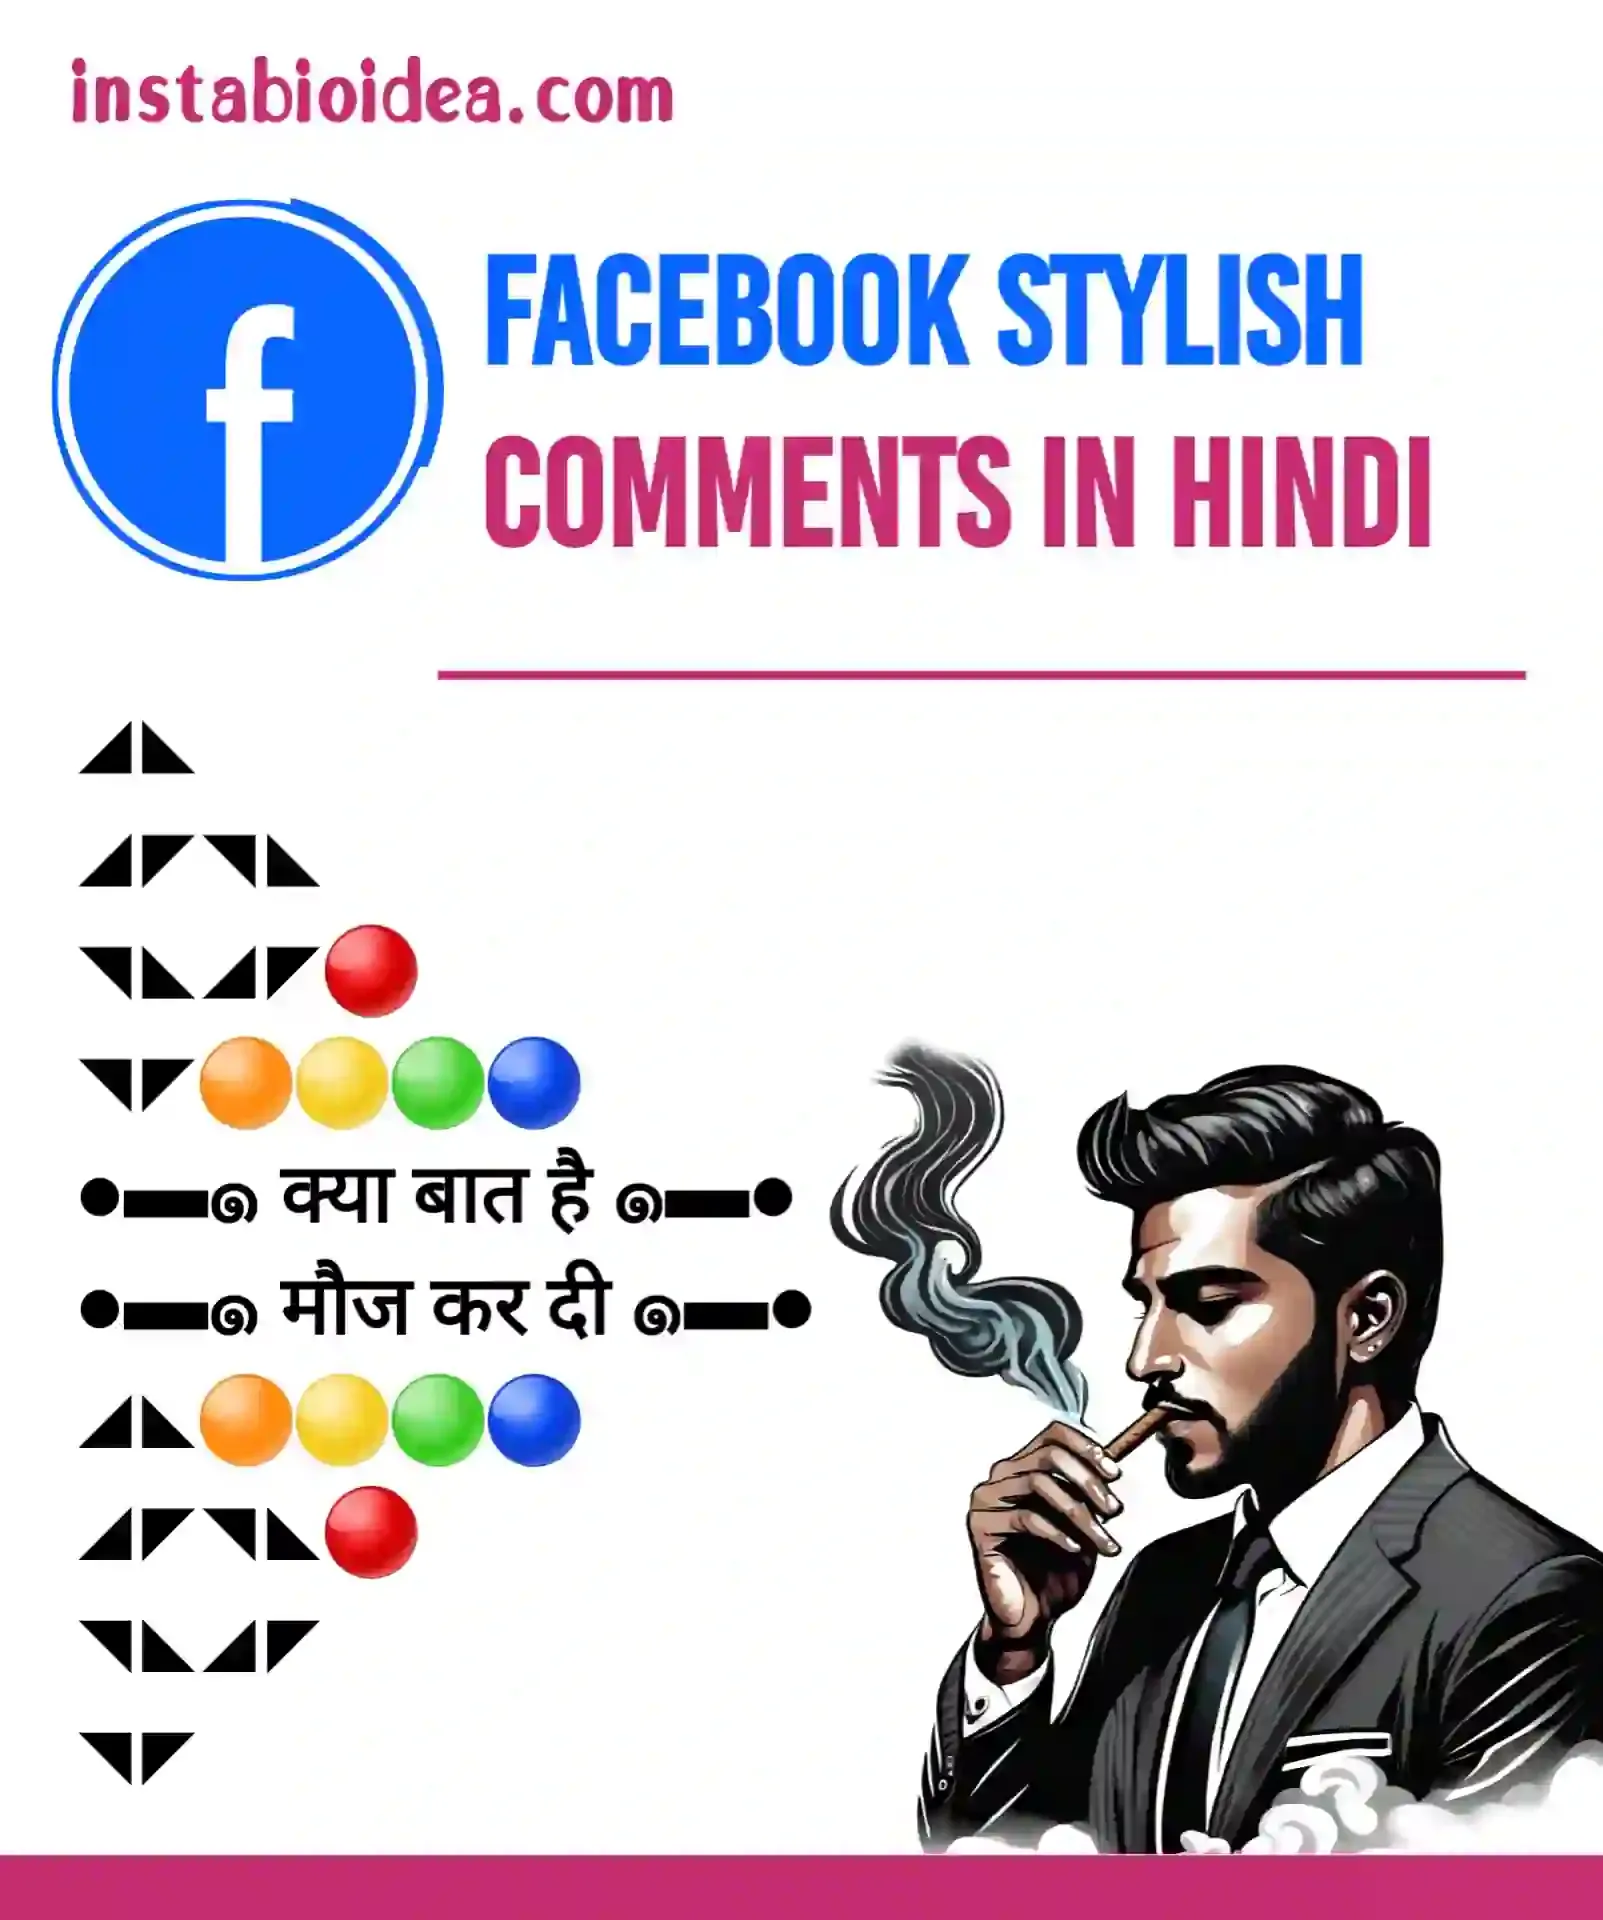 facebook stylish comments in hindi image